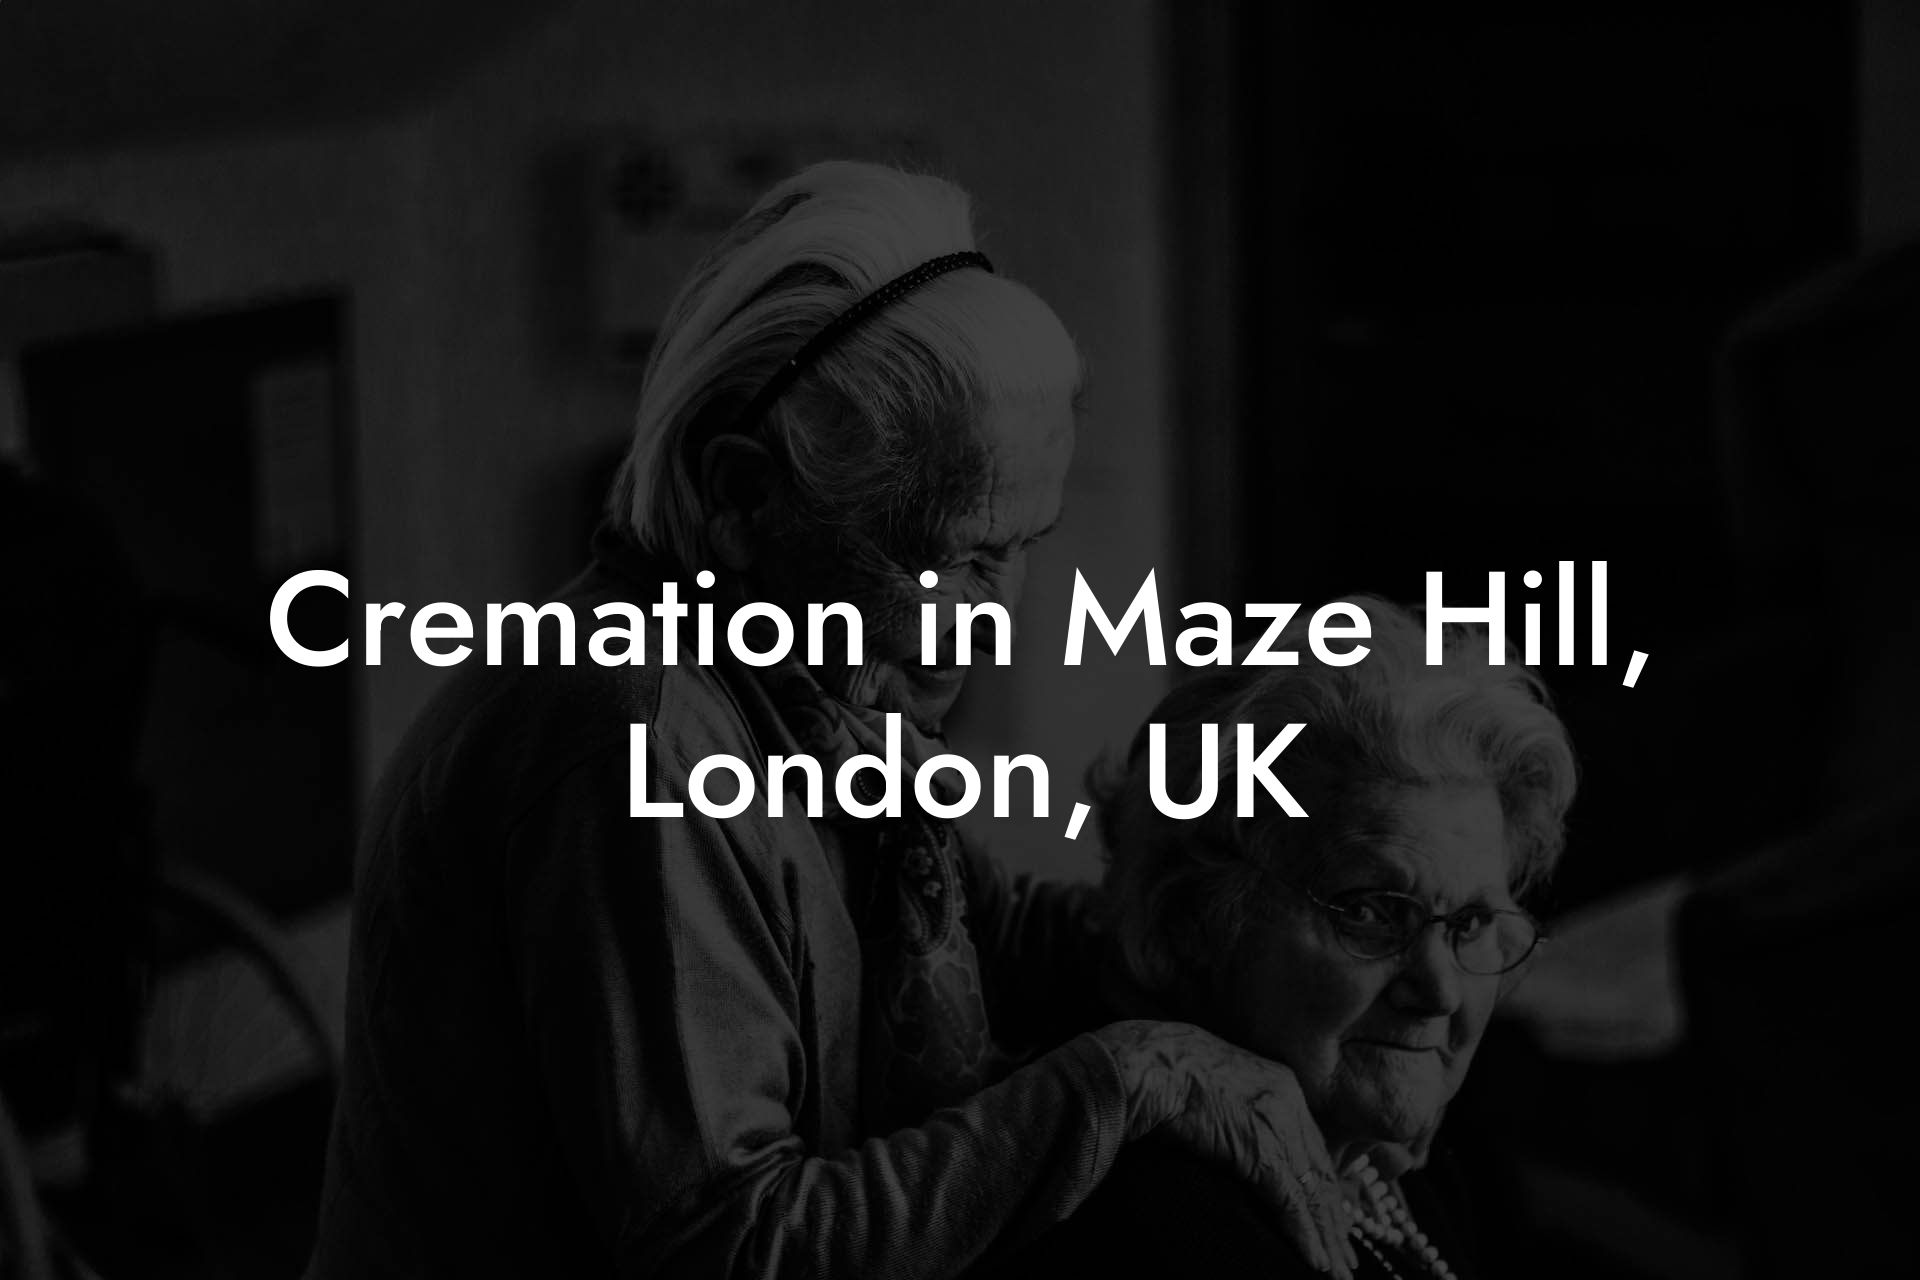 Cremation in Maze Hill, London, UK